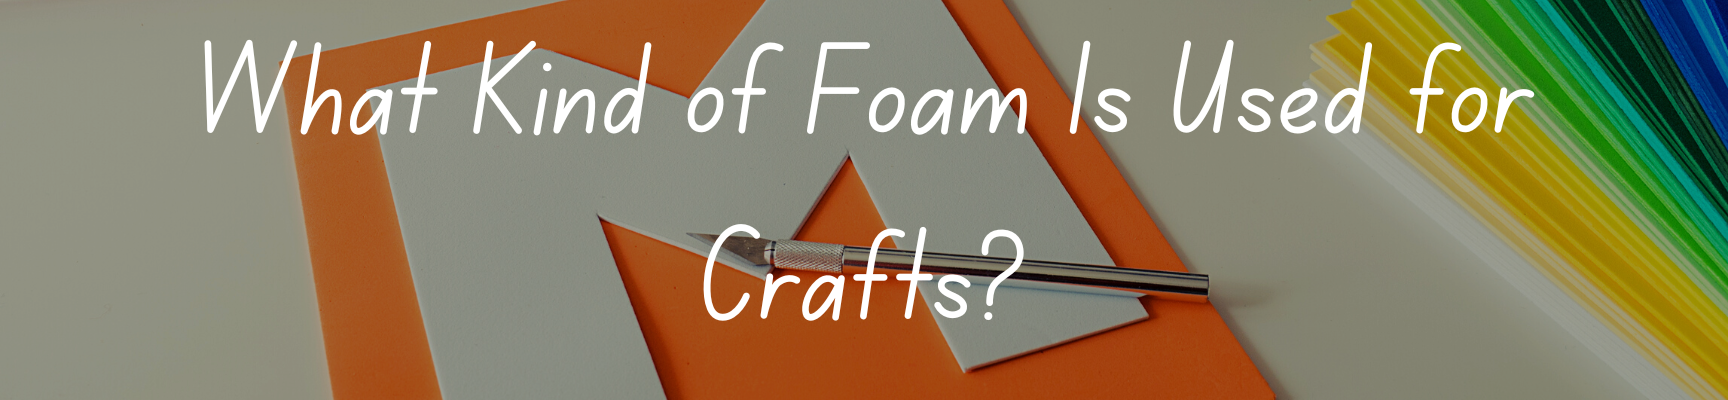 What Kind of Foam Is Used for Crafts